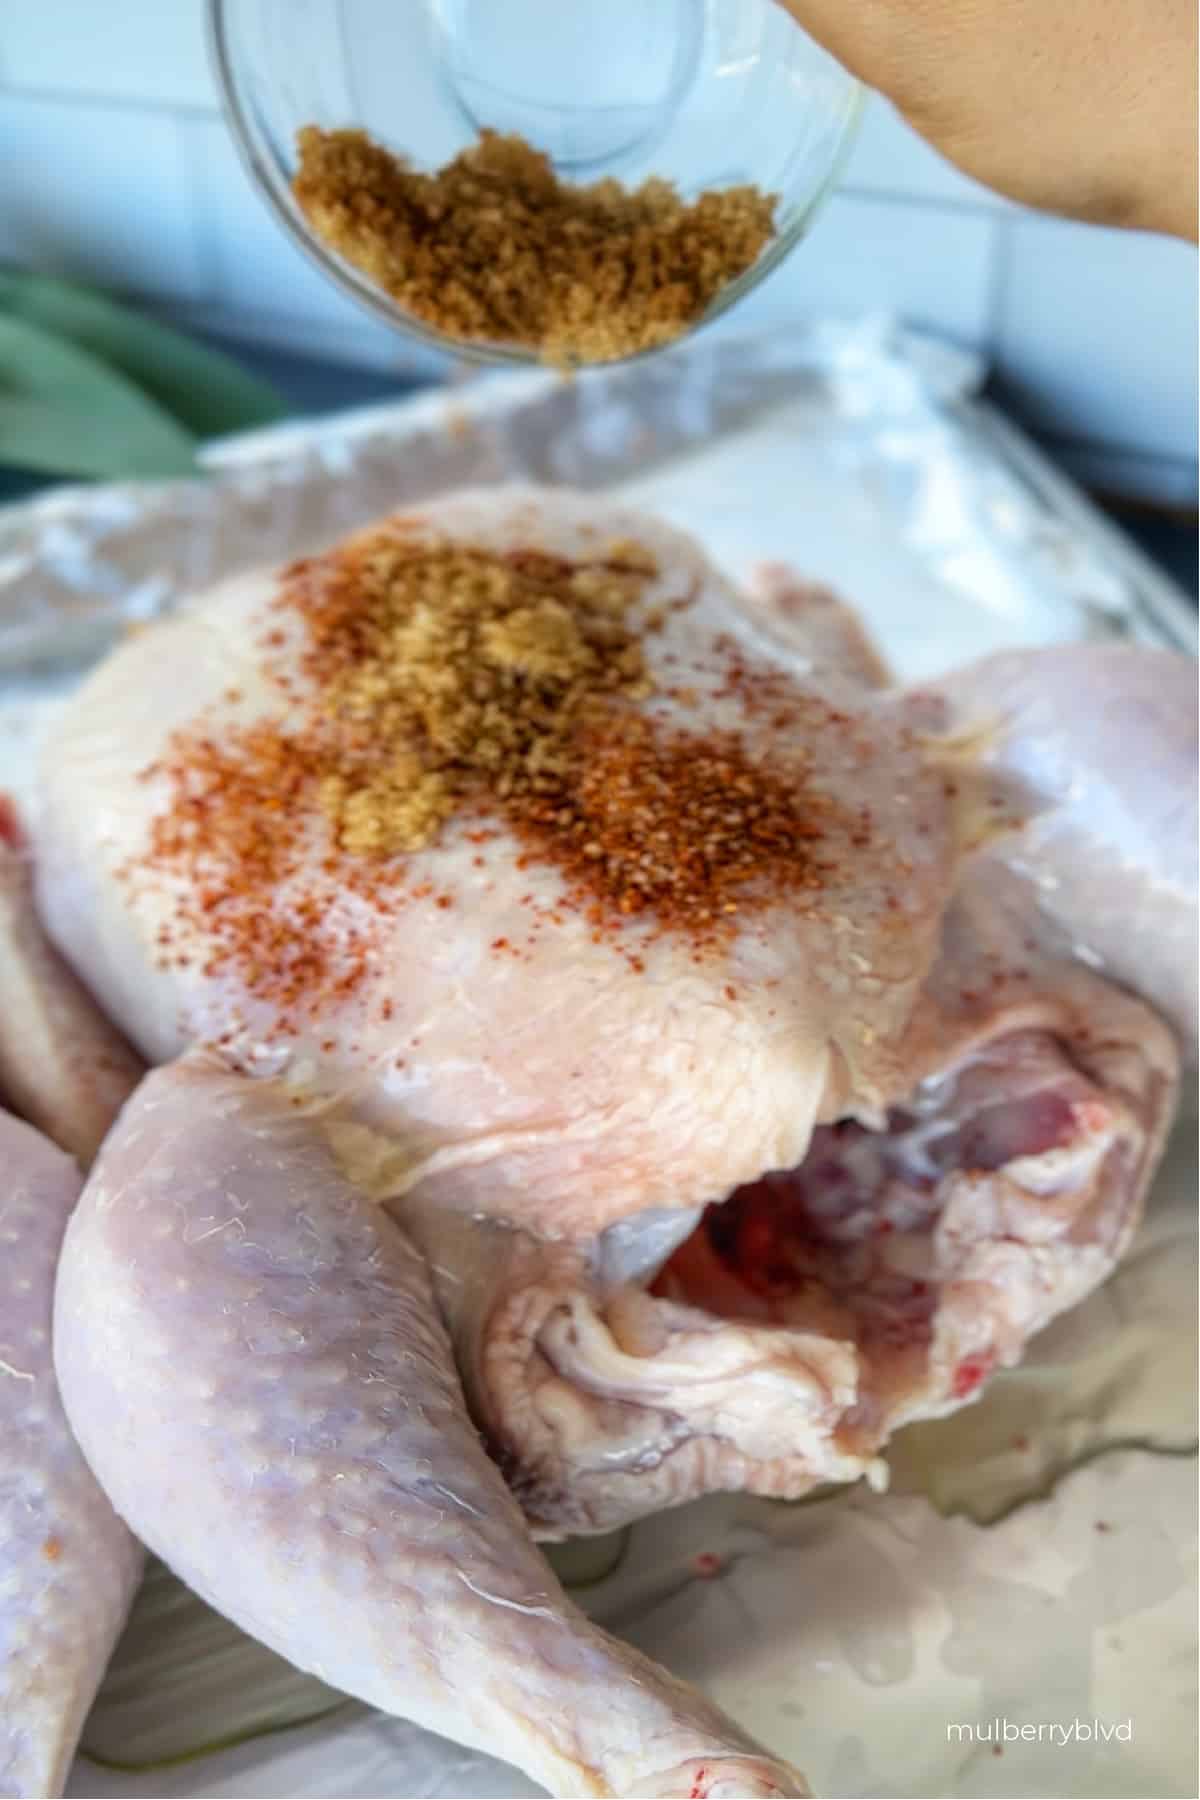 an image showing a hand sprinkling brown sugar, cinnamon and other spices on a raw chicken.